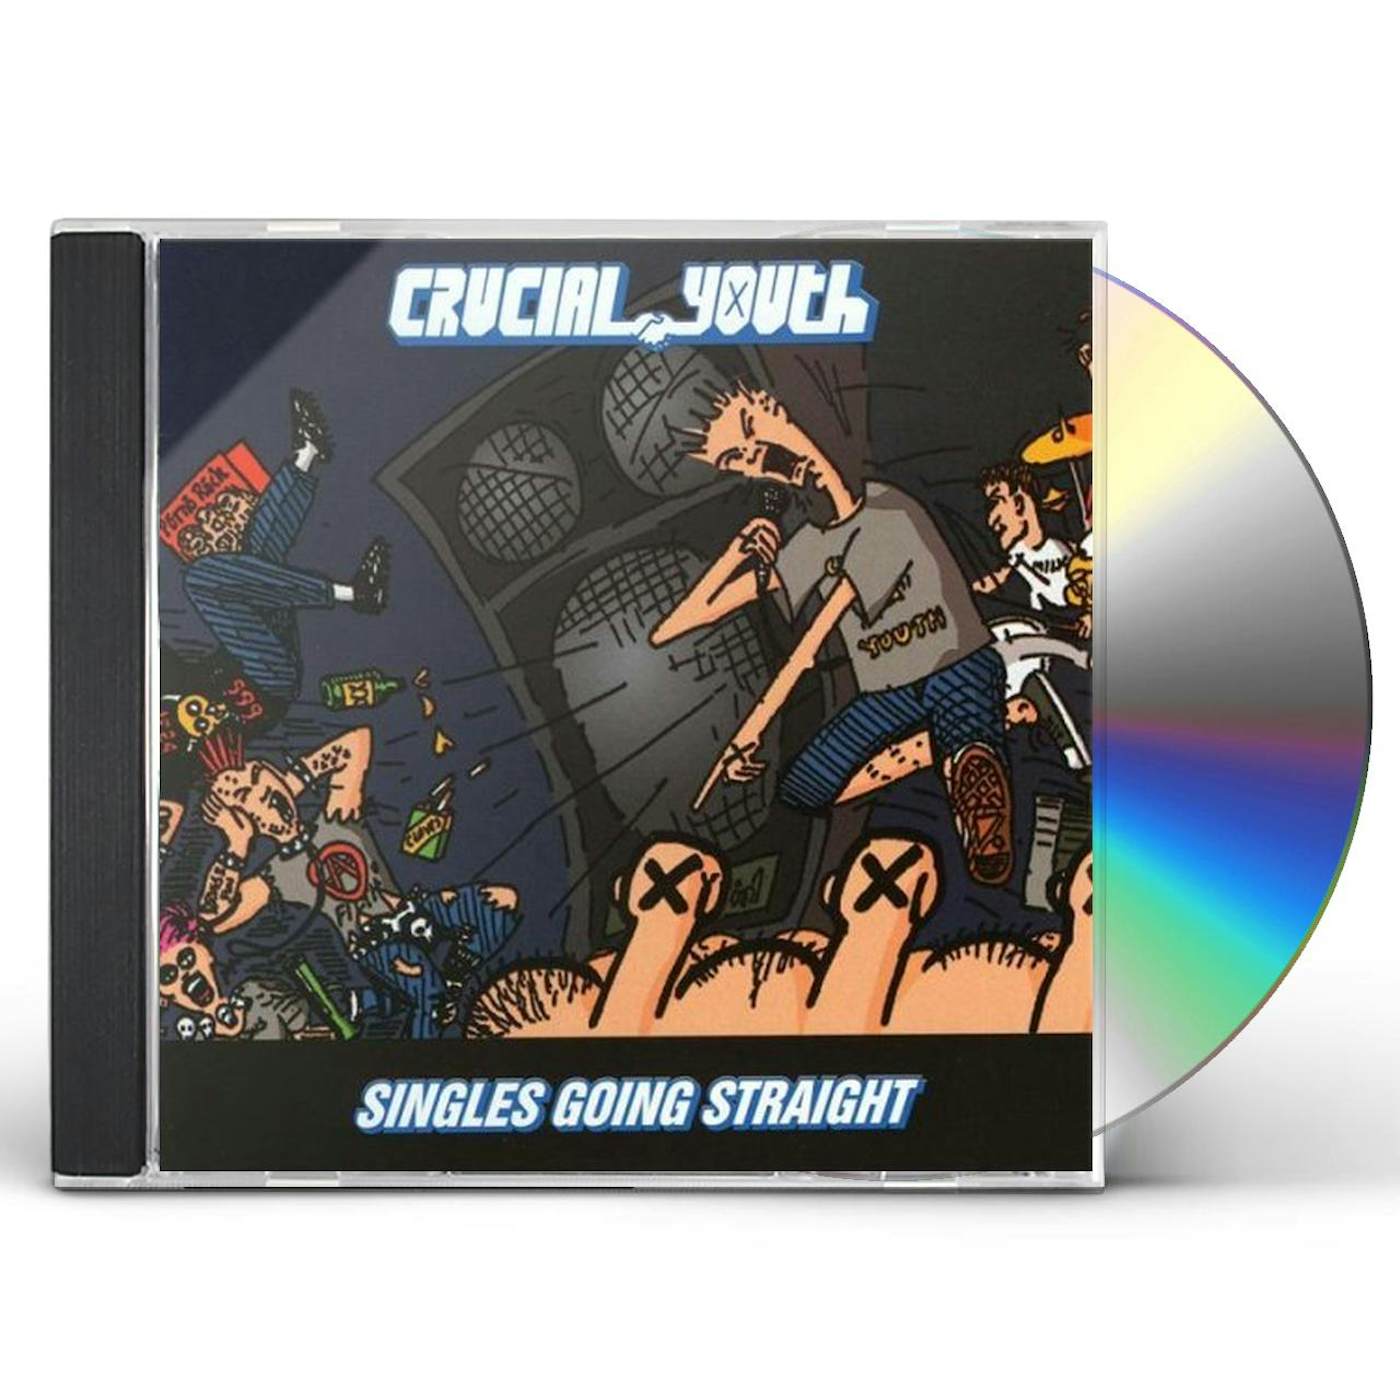 Crucial Youth SINGLES GOING STRAIGHT CD